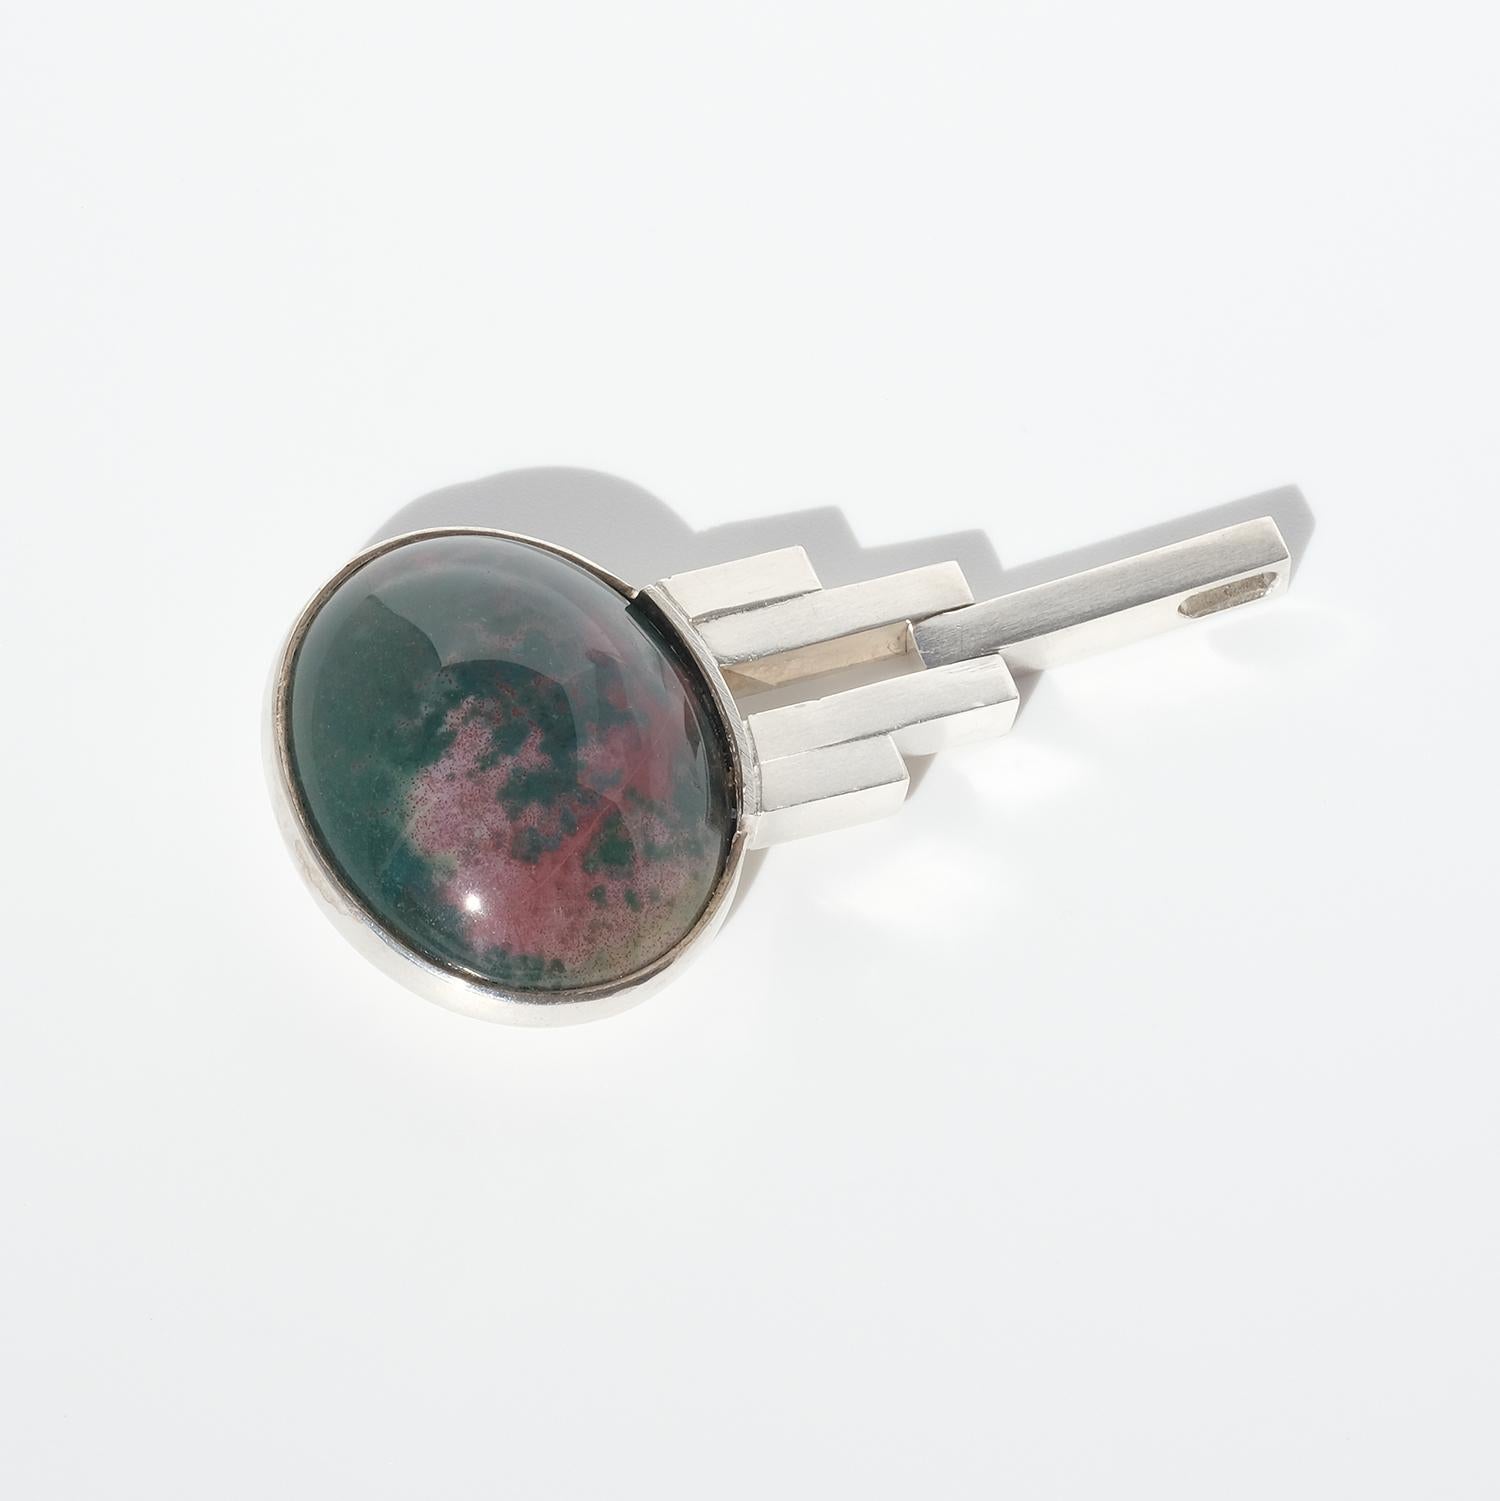 This silver neck-ring has a pendant made out of sterling silver and a cabochon cut variegated jasper stone in dark green and red. The top of the pendant is decorated with a spiral made out of five silver bars, a creation that might bring your